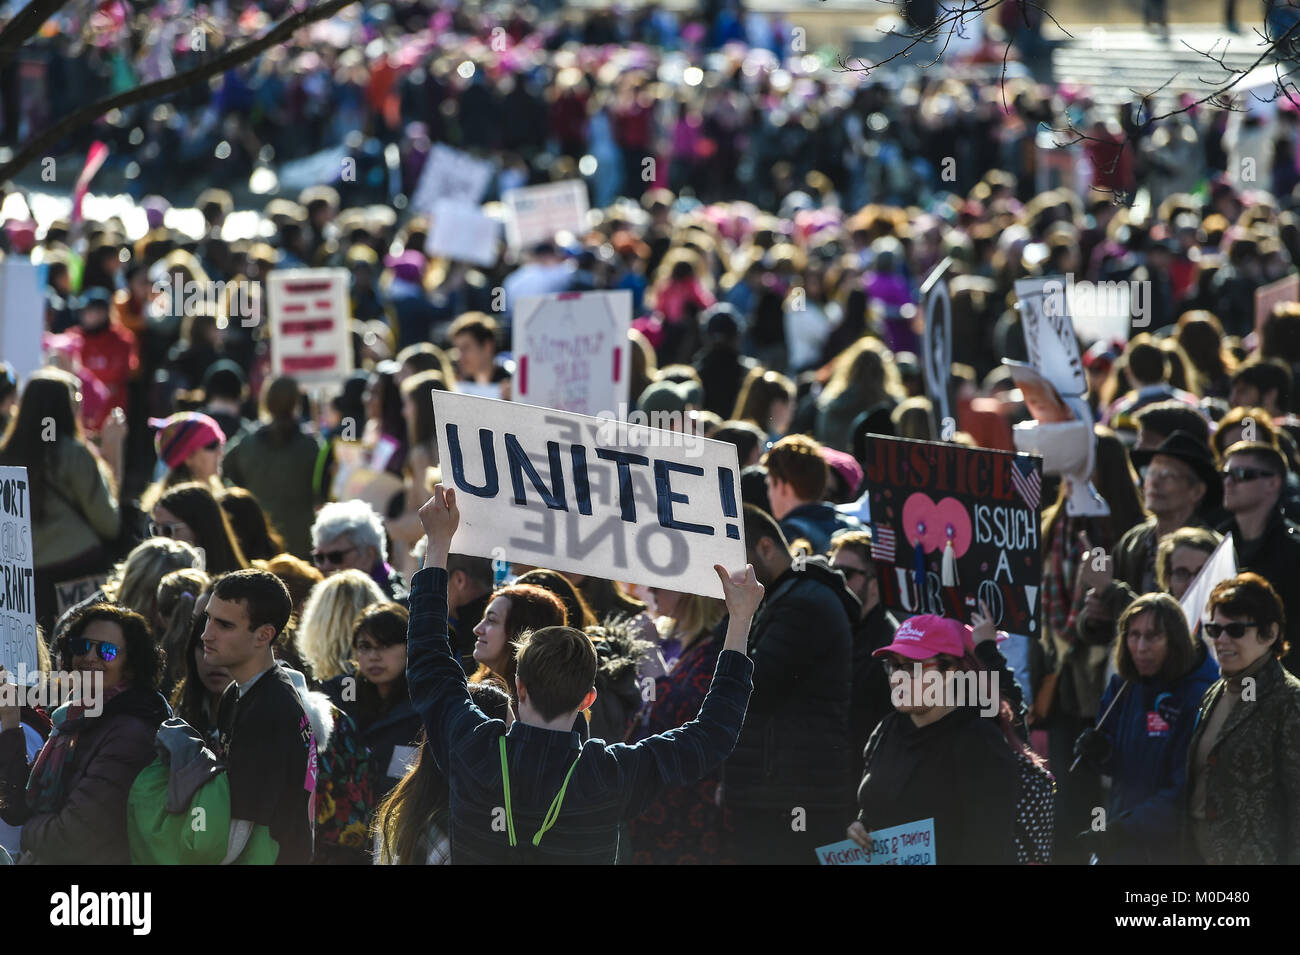 Washington DC, USA. 20th Jan, 2018. Jan. 20th Jan, 2018. A man holds a unite sign in the sea of people marching during the Women's March around Lincoln Memorial in Washington, DC, on Jan. 20, 2018 in Washington Credit: csm/Alamy Live News Credit: Cal Sport Media/Alamy Live News Stock Photo